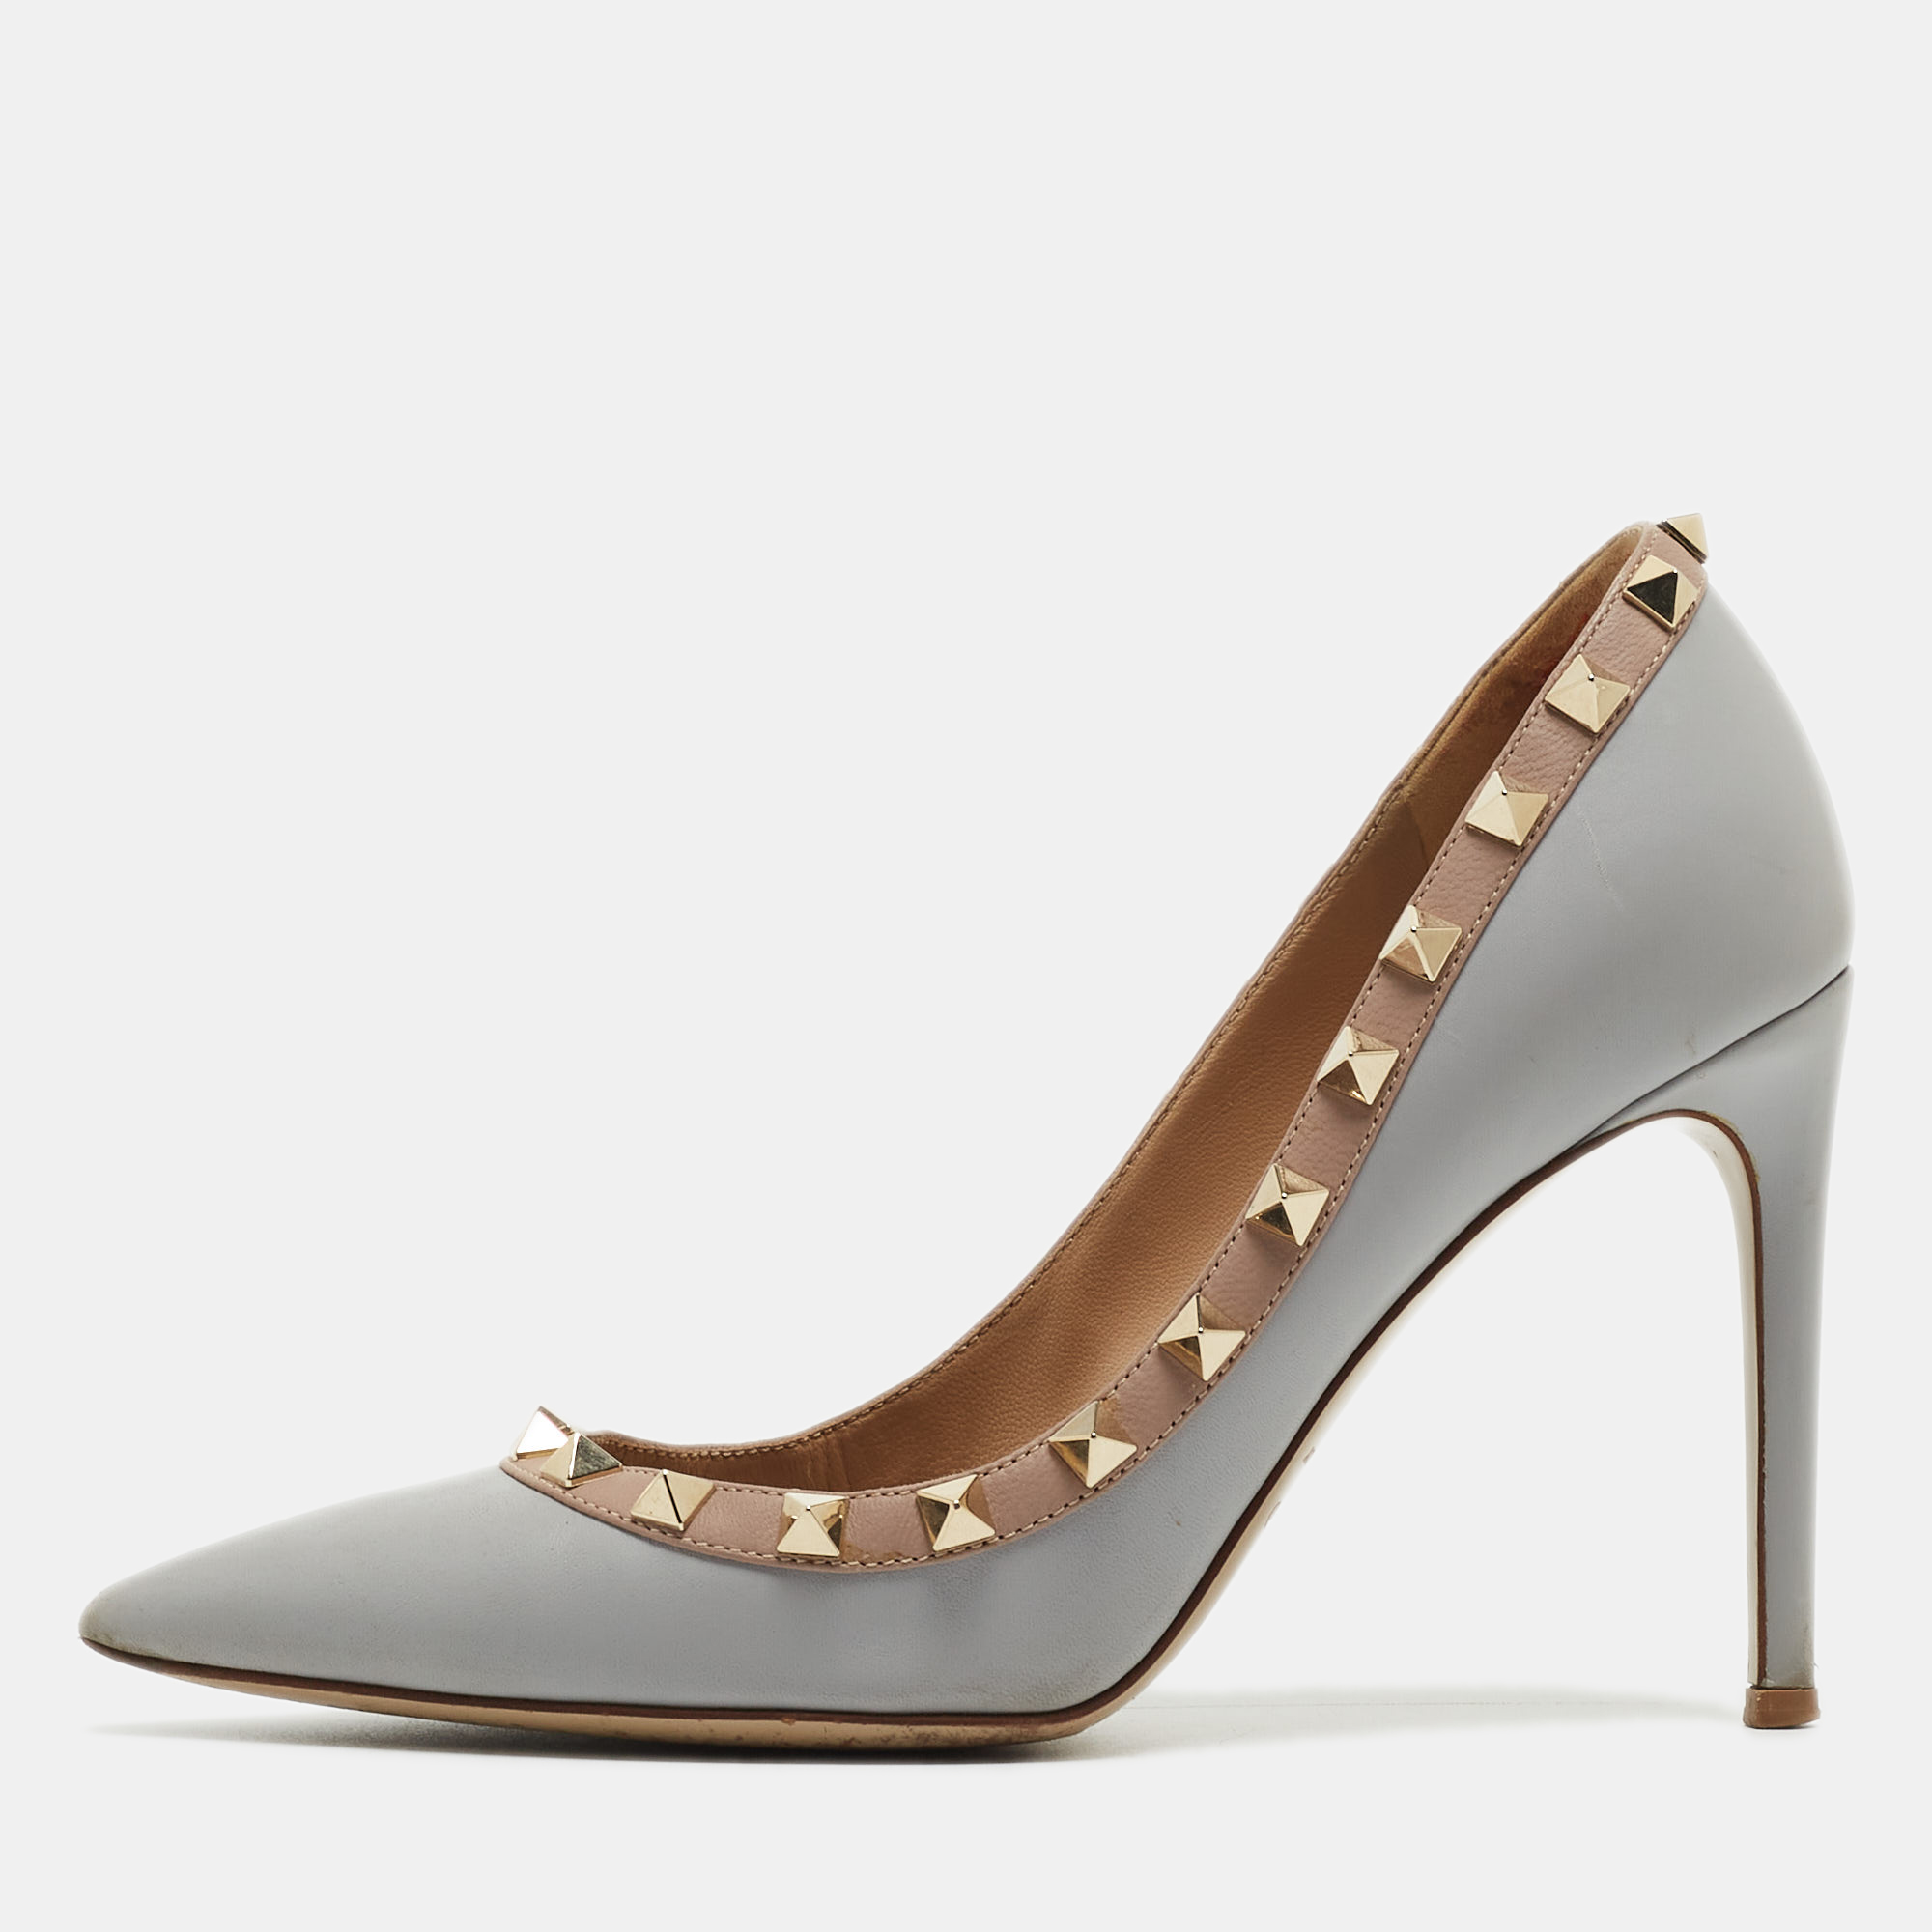 Valentino grey/beige leather rockstud pointed toe pumps size 35